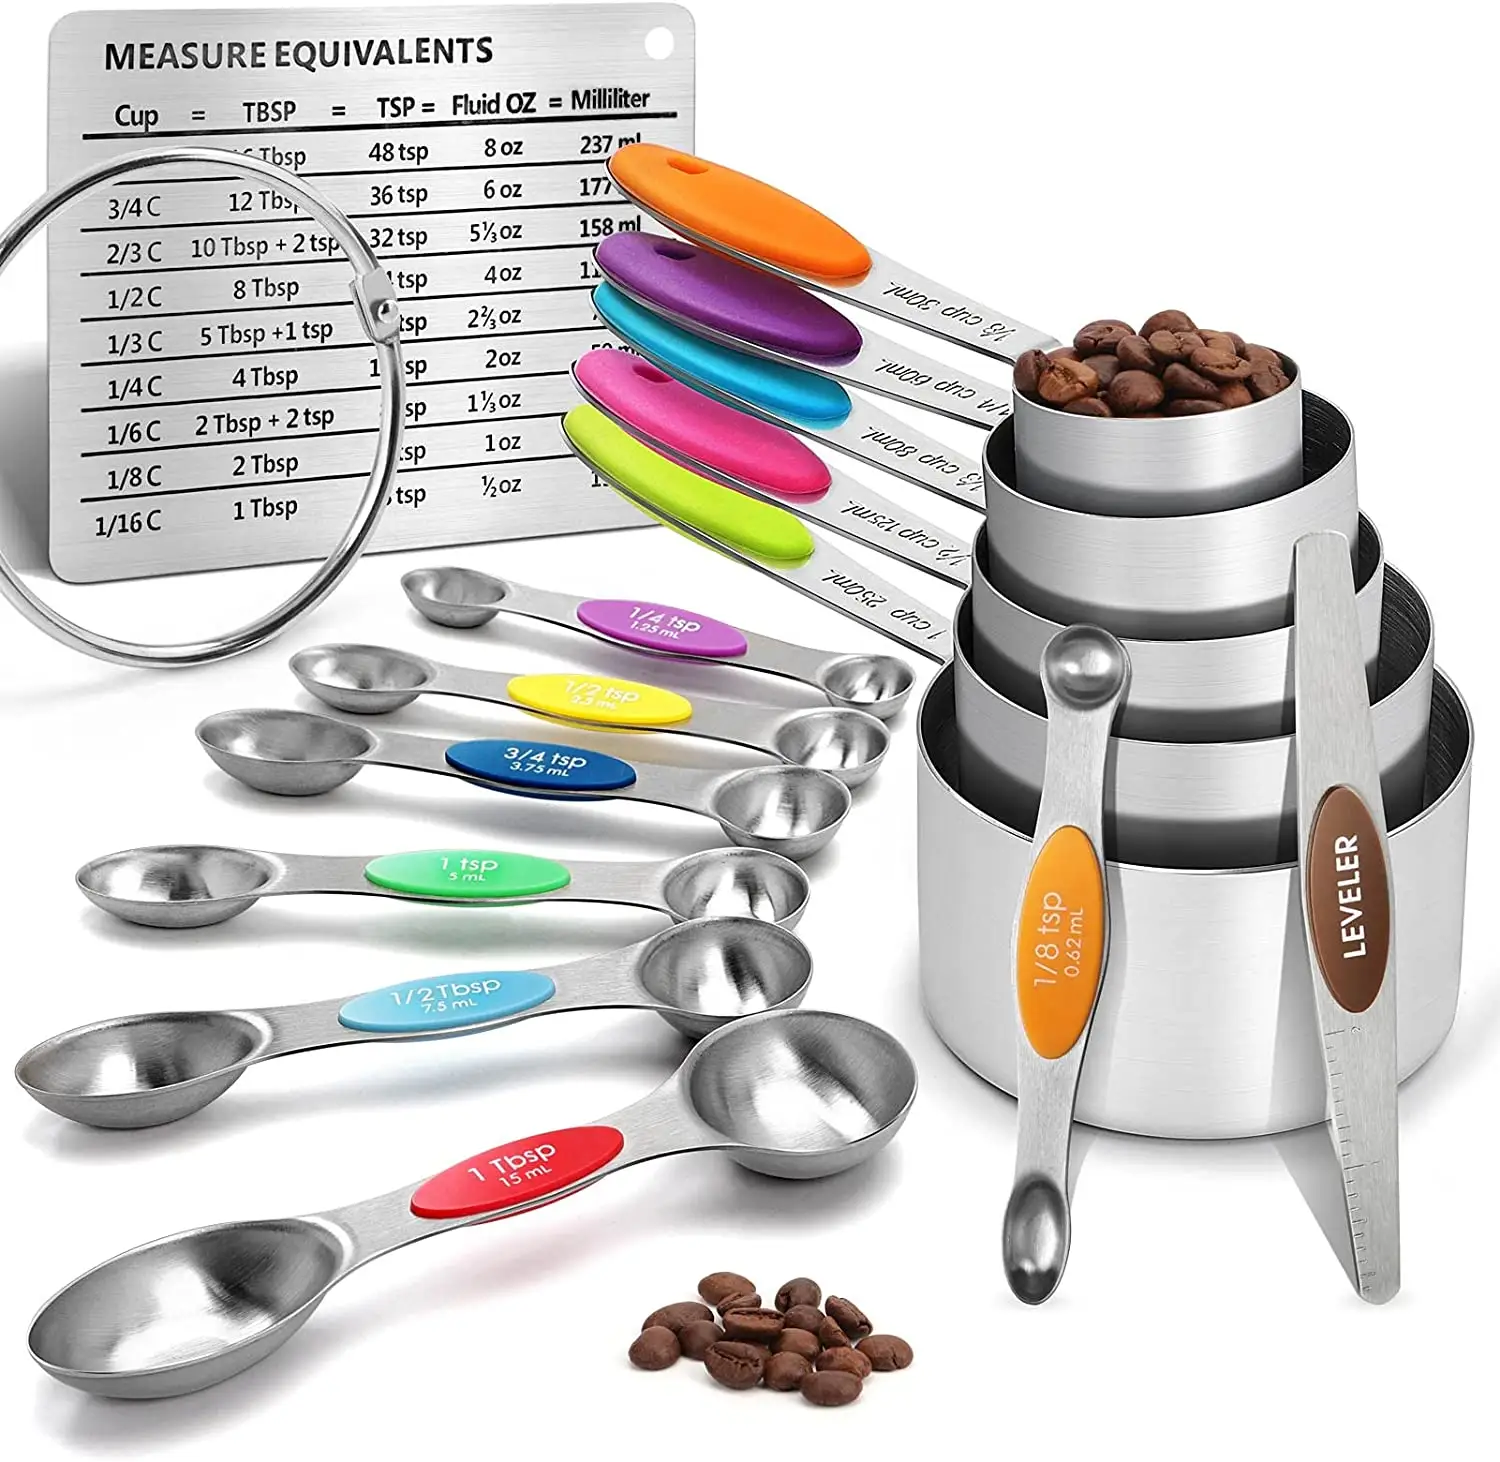 14 Piece Stainless Steel Measuring Cup and Magnetic Measuring Spoons Set with Leveler and Measuring Conversion Chart